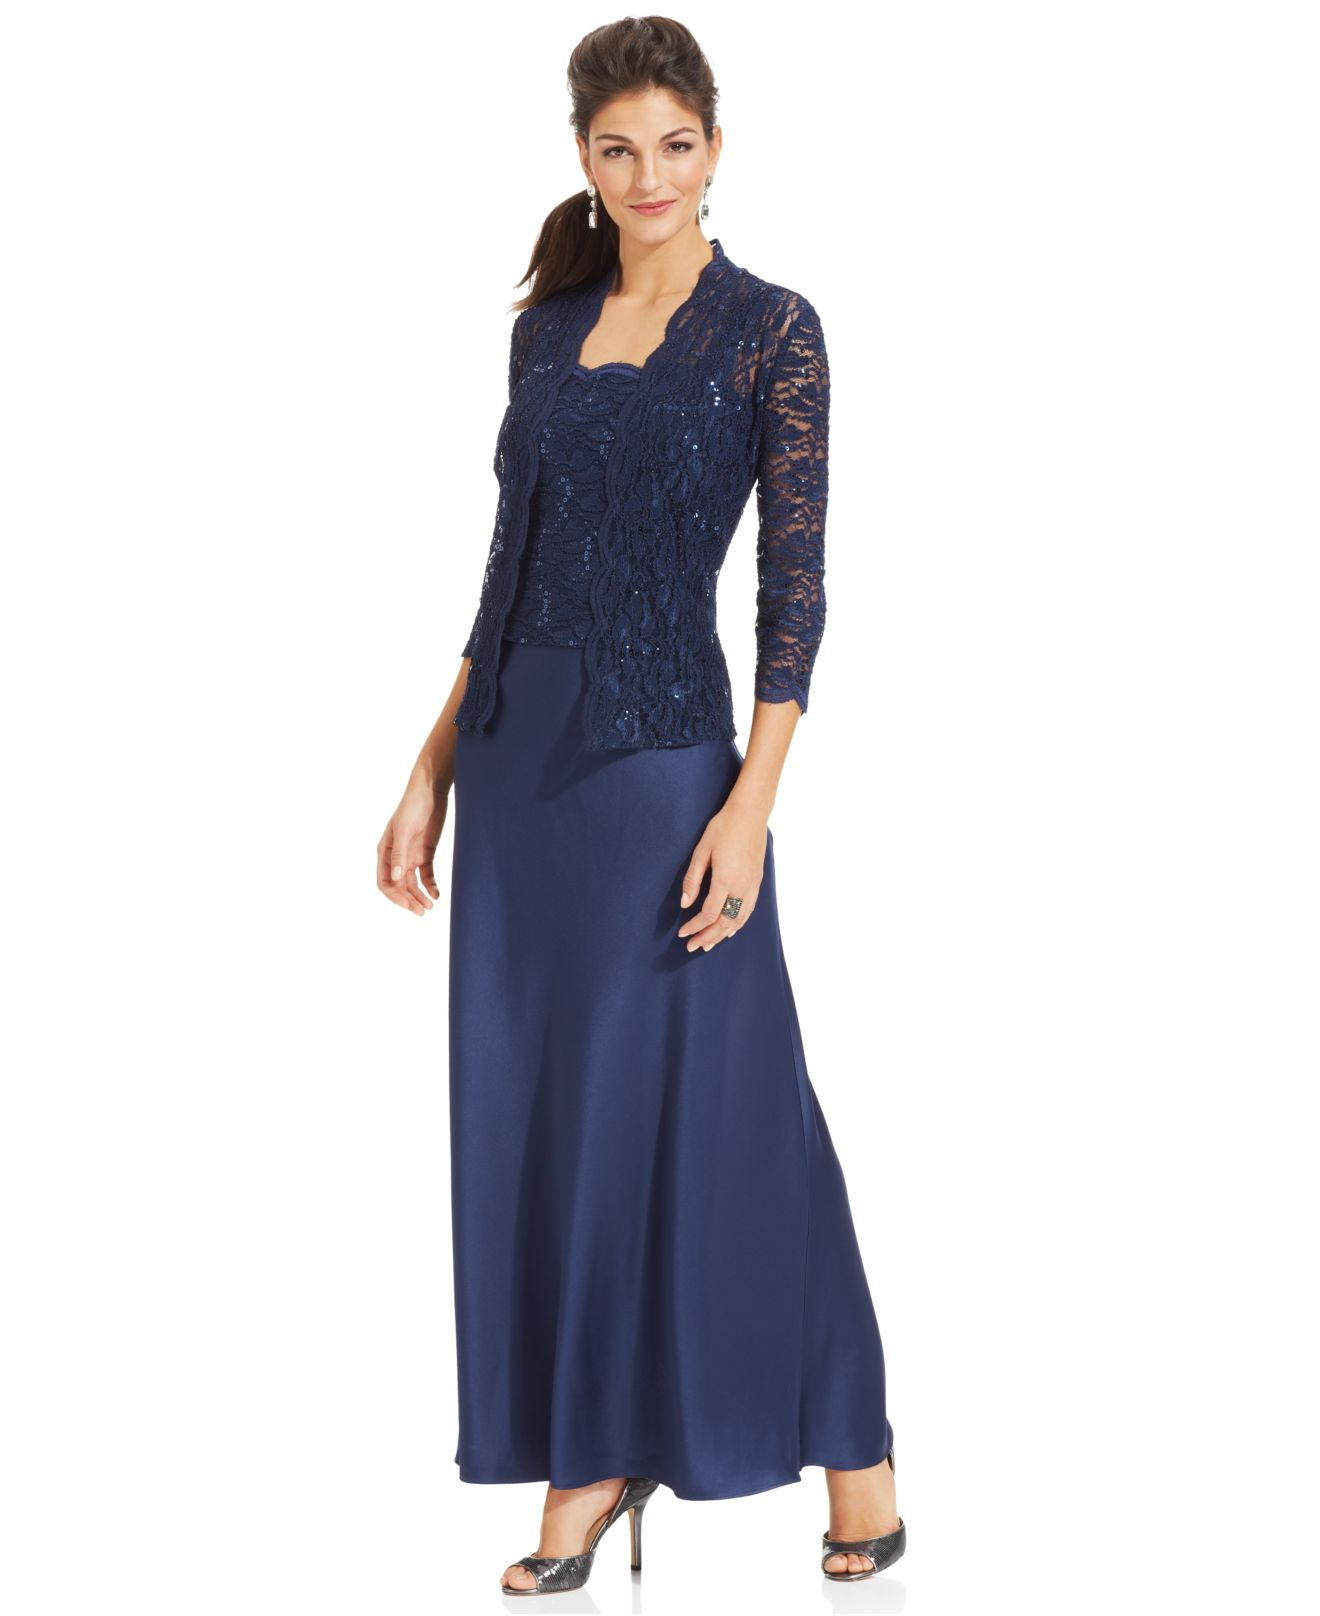 Lyst - Alex Evenings Sleeveless Sequin-lace Gown And Jacket in Blue